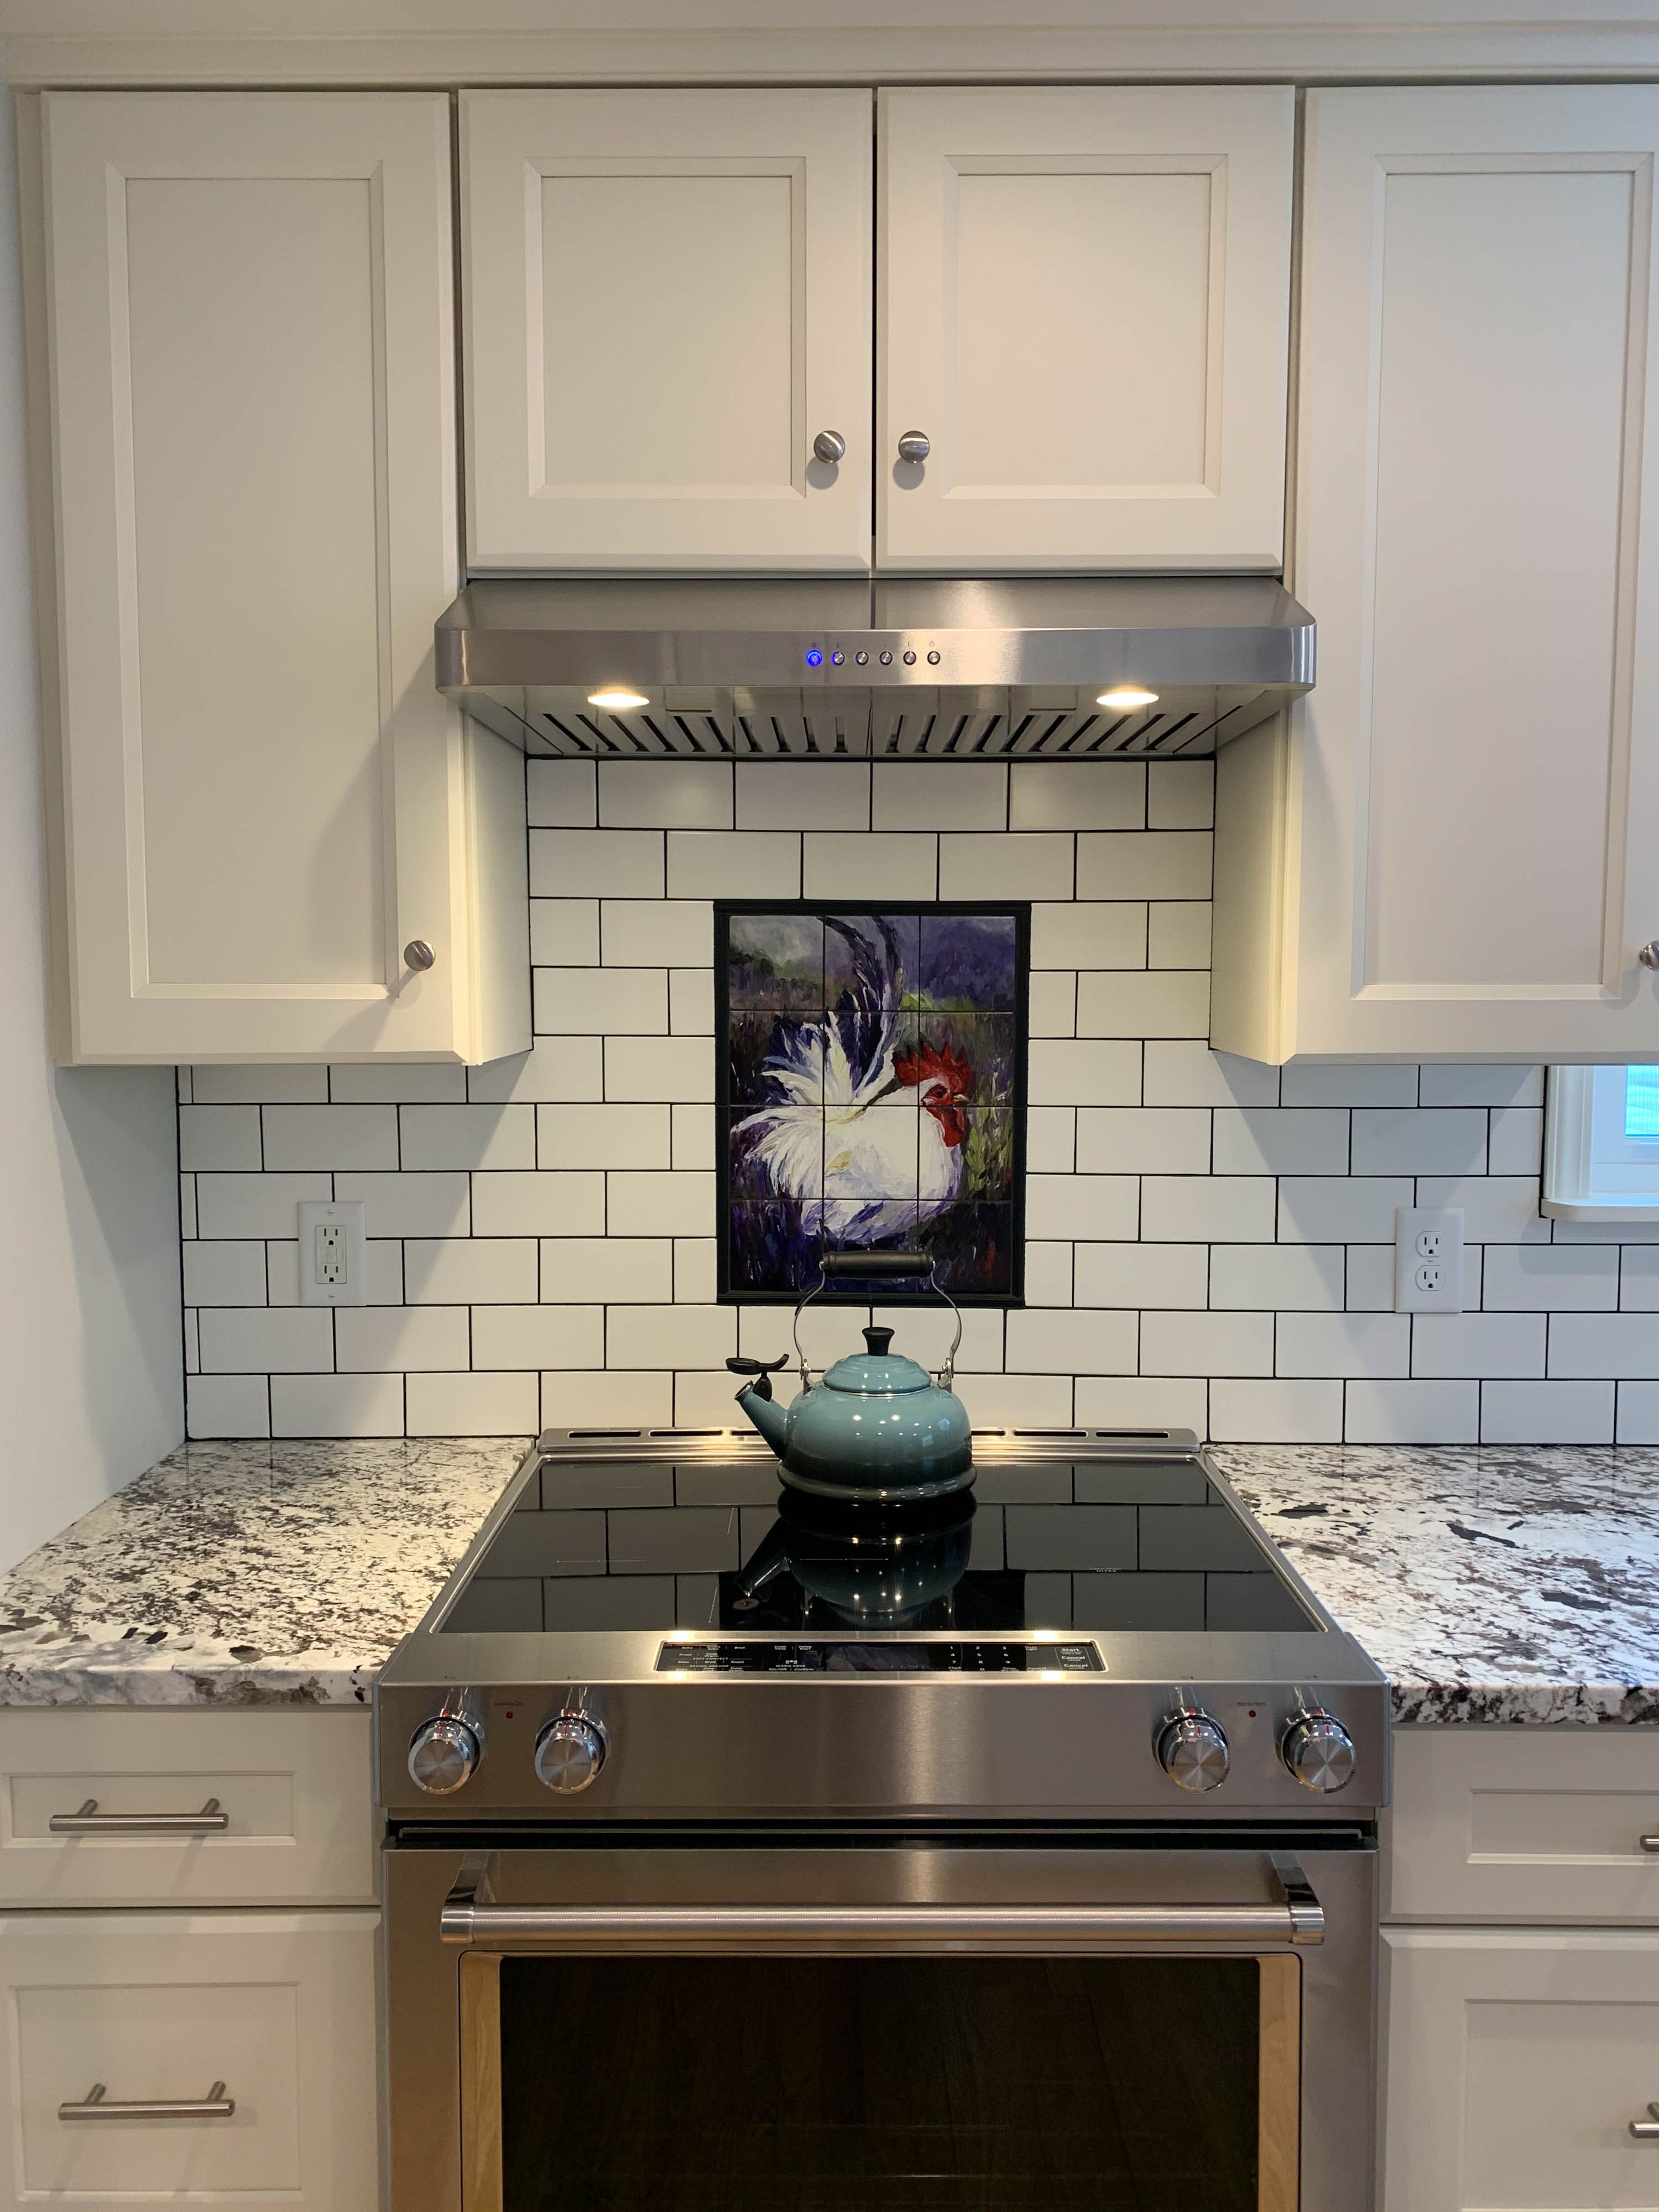 A Proline pljw 185 range hood in a kitchen with a tea pot on the stove